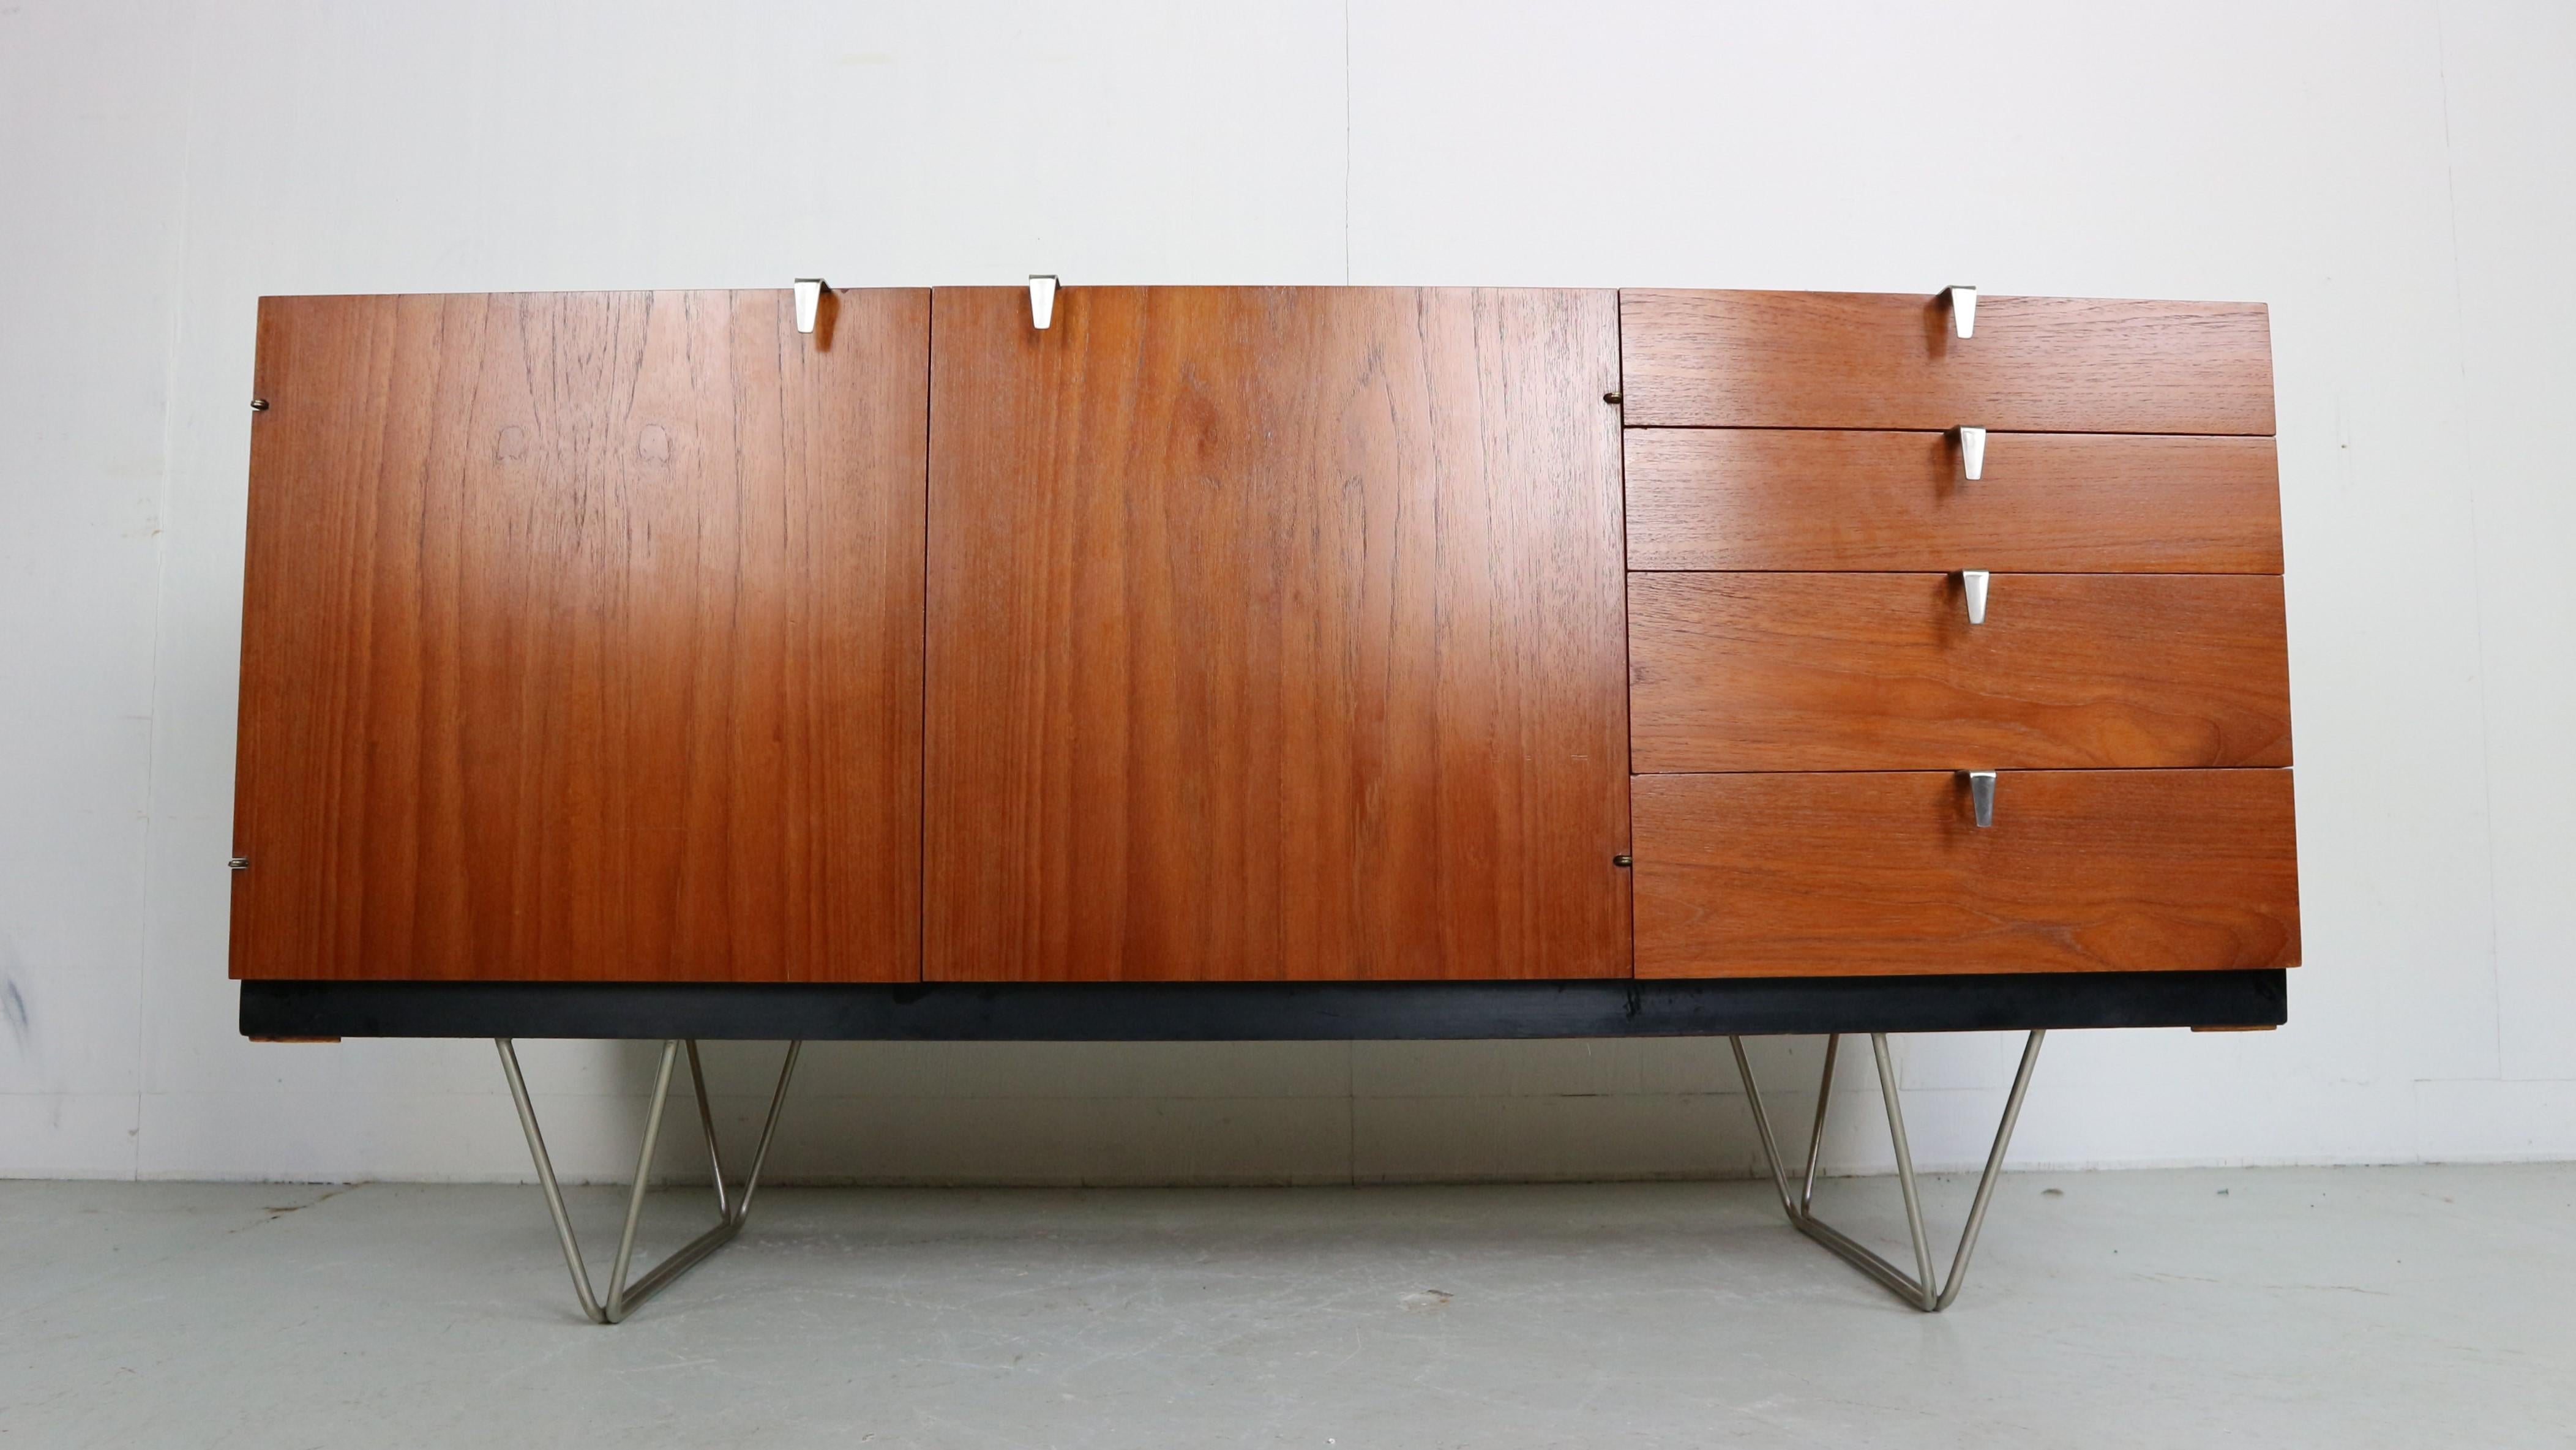 A Classic late 1950s sideboard designed by John and Sylvia Reid, from the ‘S Range’ produced in England by Stag Furniture. Made in teak with polished steel handles and hairpin legs in very good condition.
These cabinets were only produced,